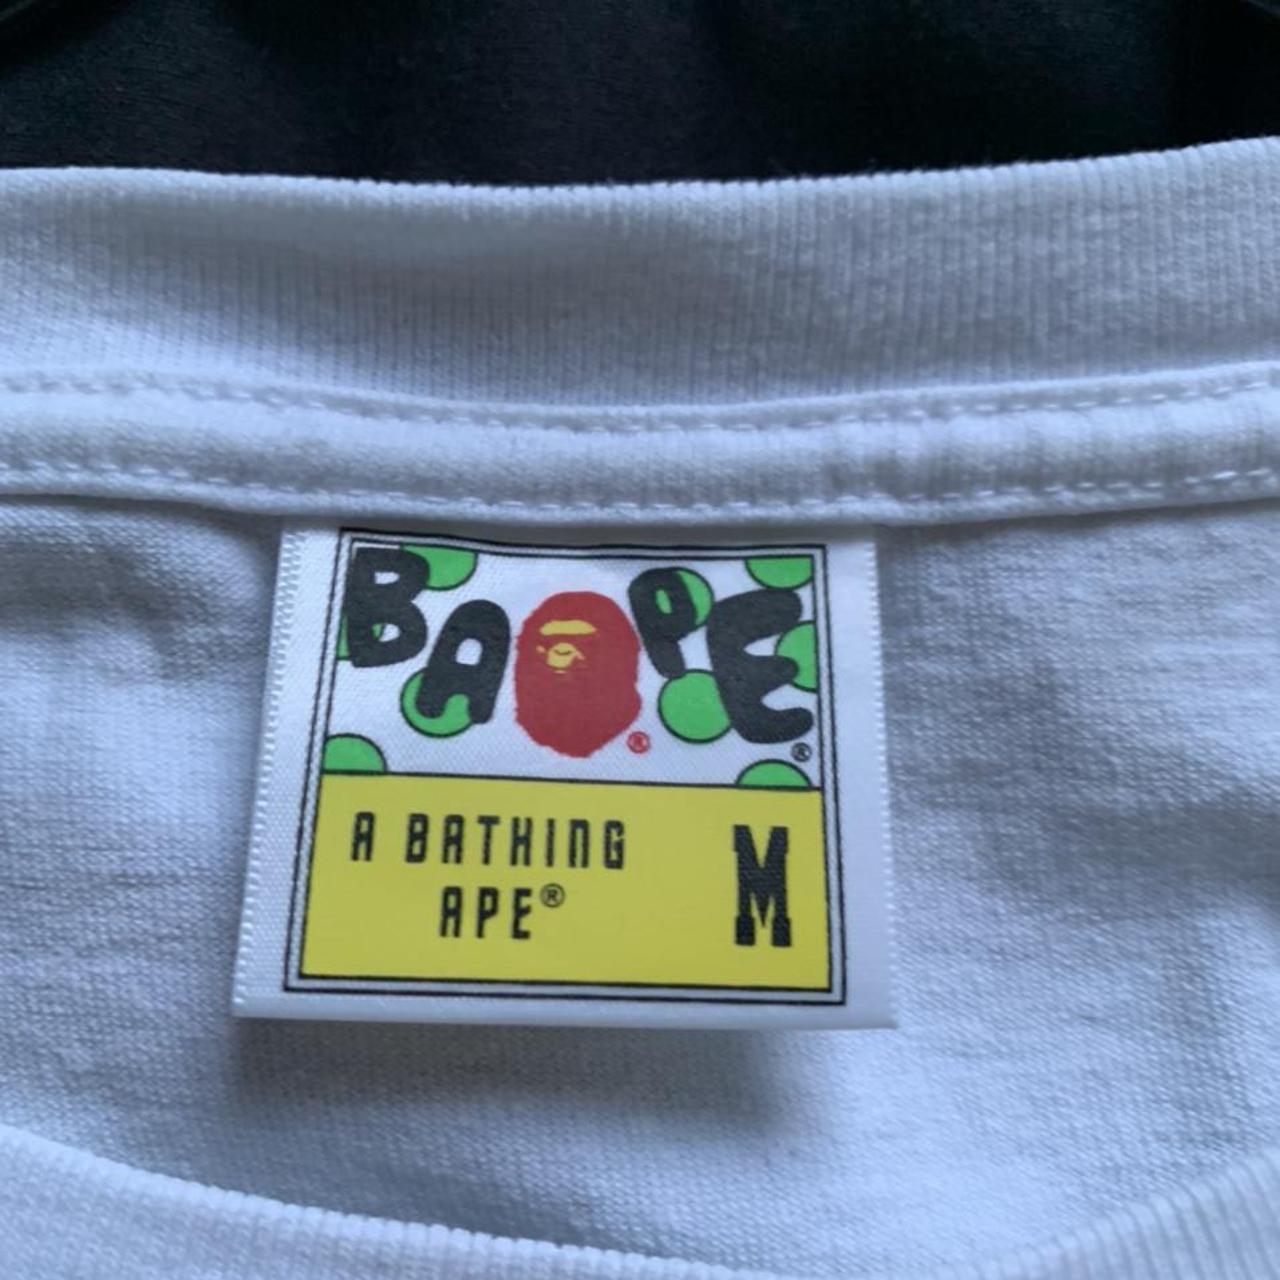 Product Image 2 - Bape baby milo
Size M
Great condition